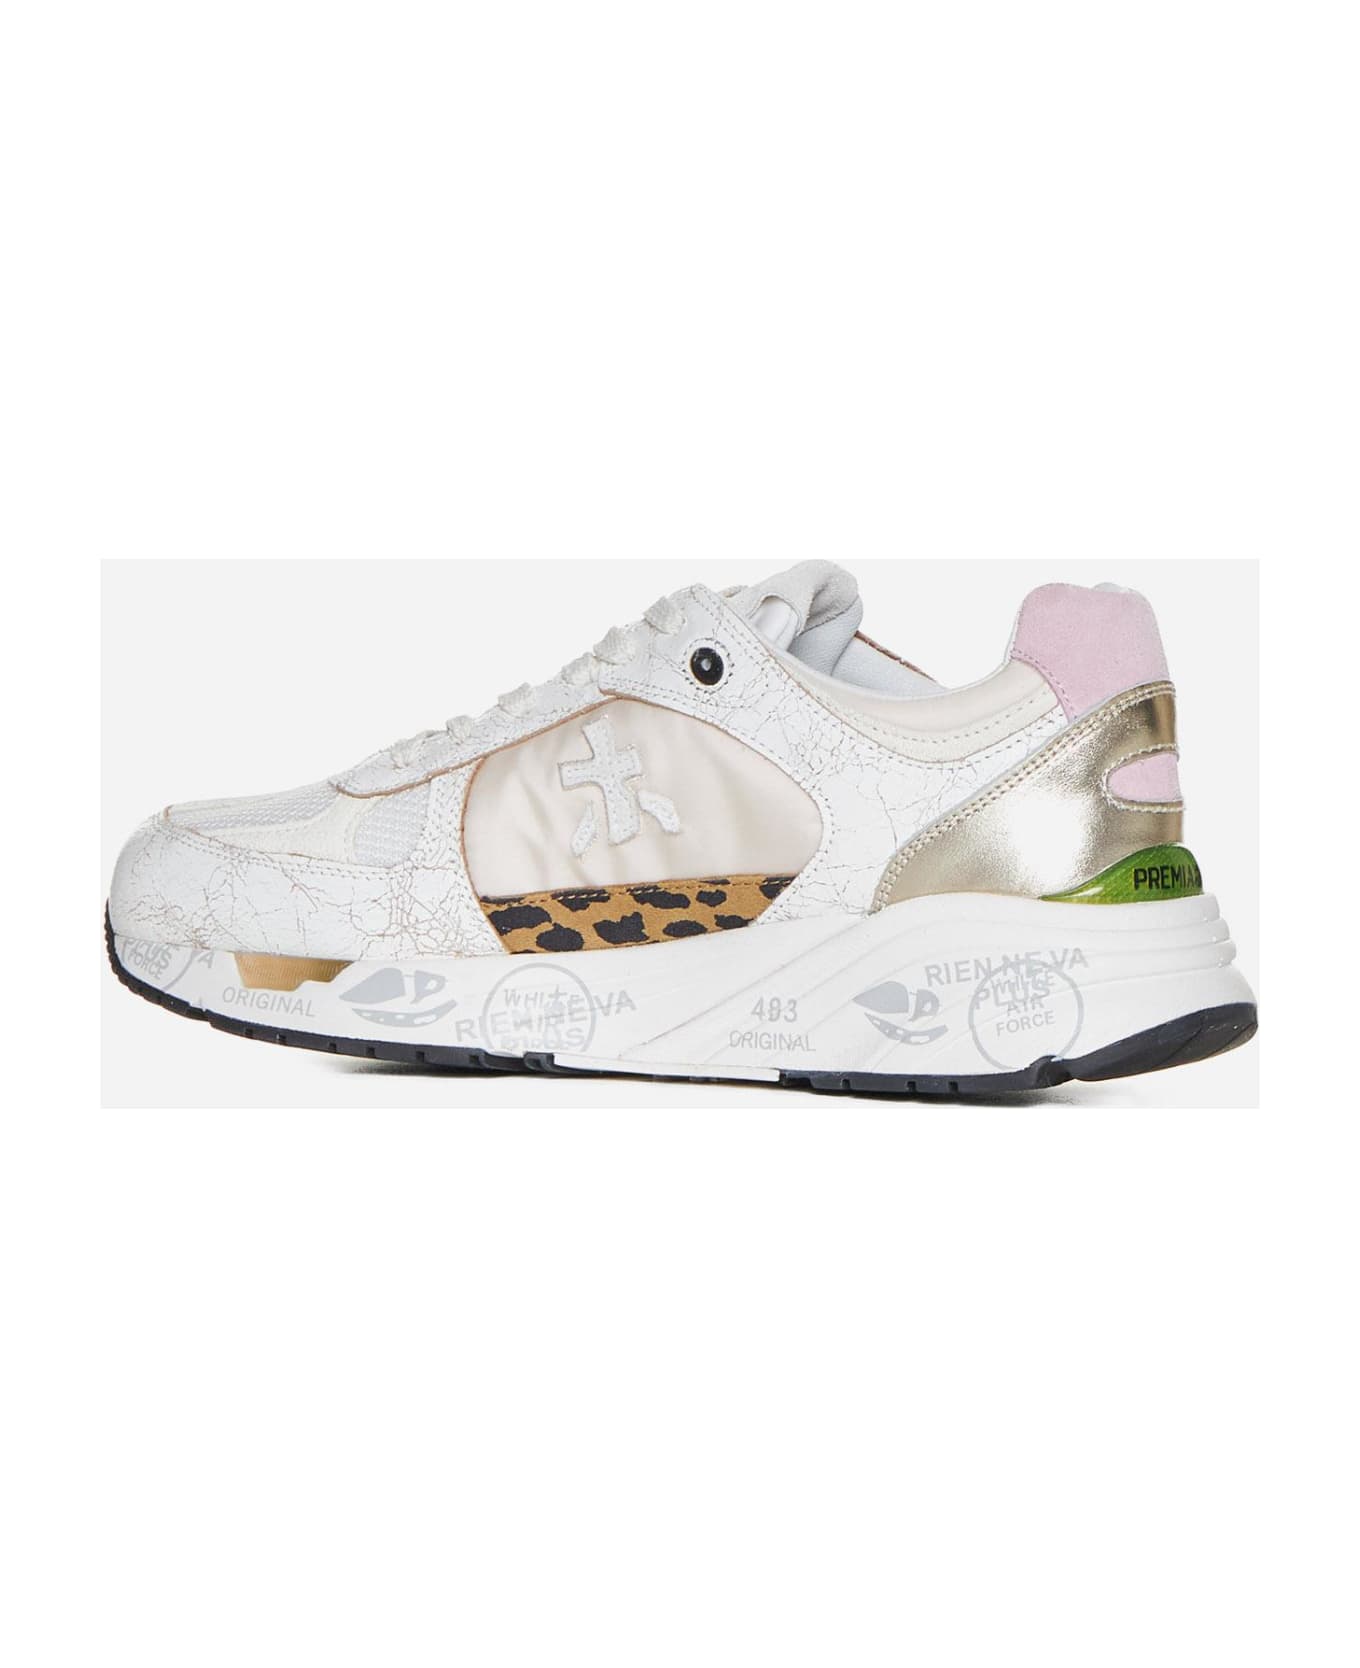 Premiata Mased Leather, Suede And Nylon Sneakers - Offwhite スニーカー